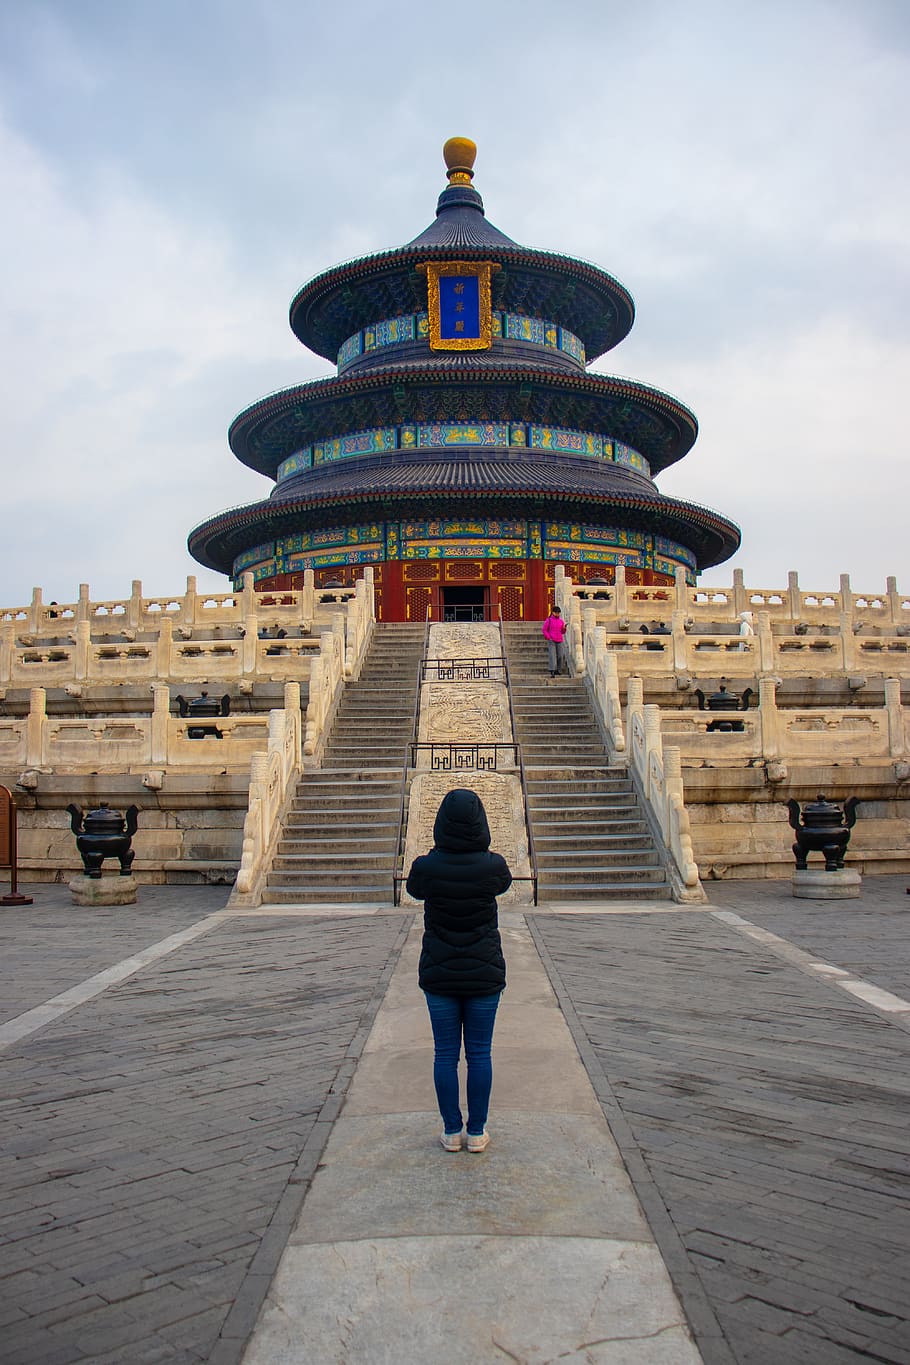 temple of heaven, beijing, architecture, traditional, building, temple, street, landmark, travel, ancient